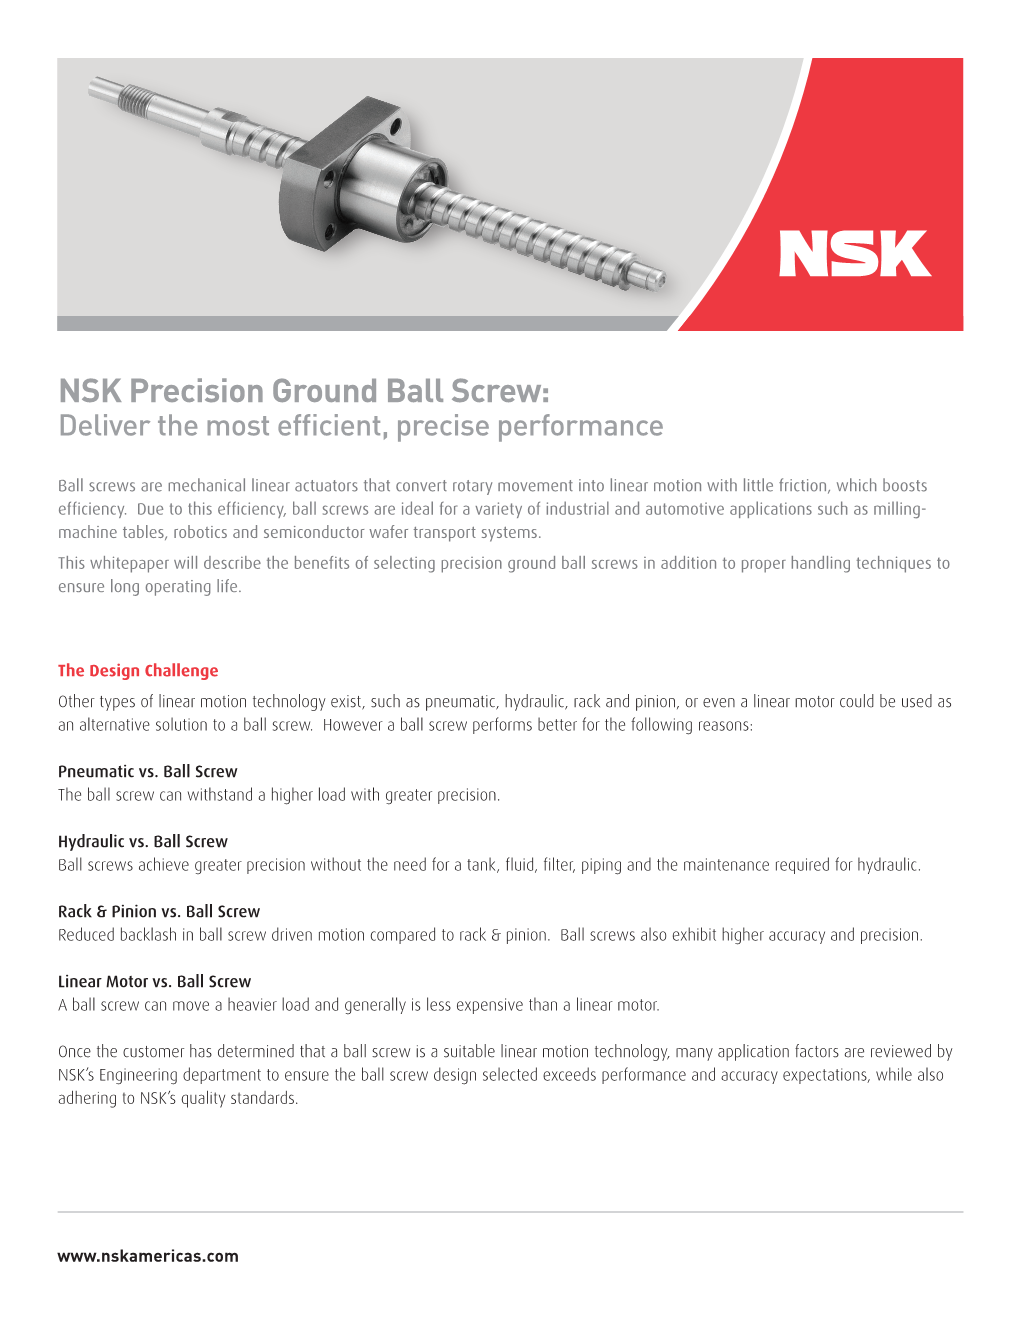 NSK Precision Ground Ball Screw: Deliver the Most Efficient, Precise Performance